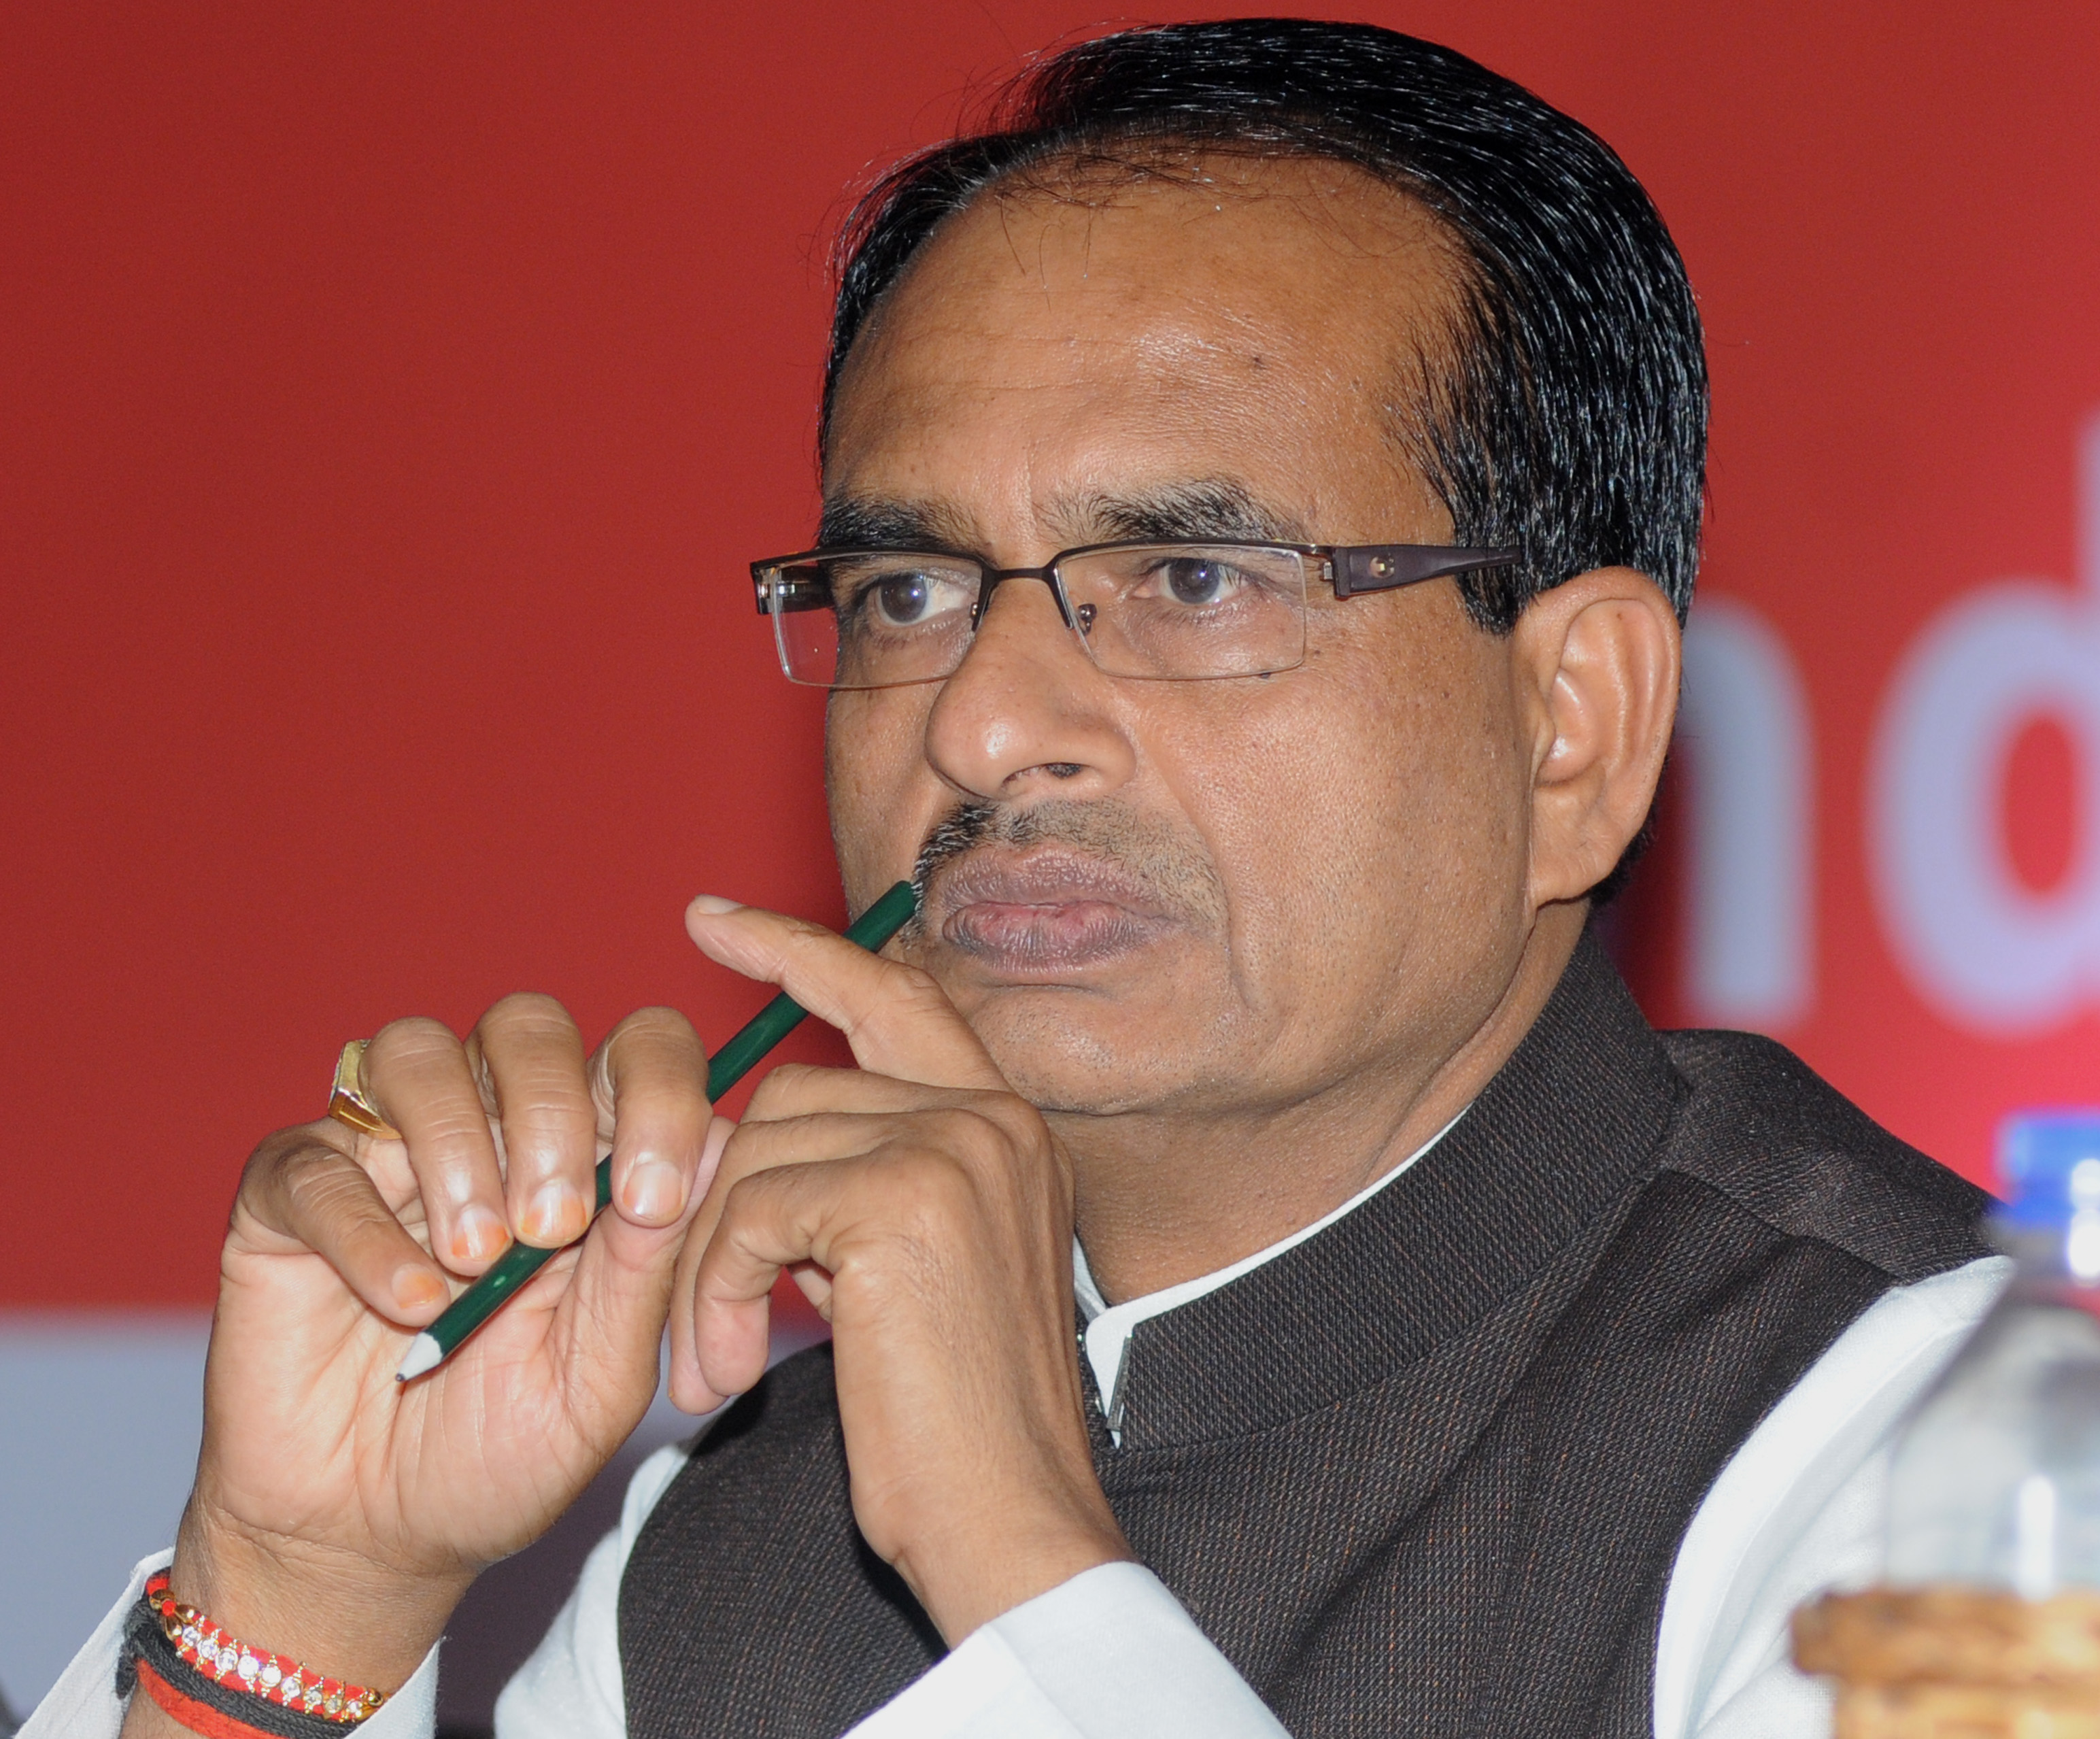 The BJP, under the leadership of Shivraj Singh Chouhan, is seeking a fourth term in office.